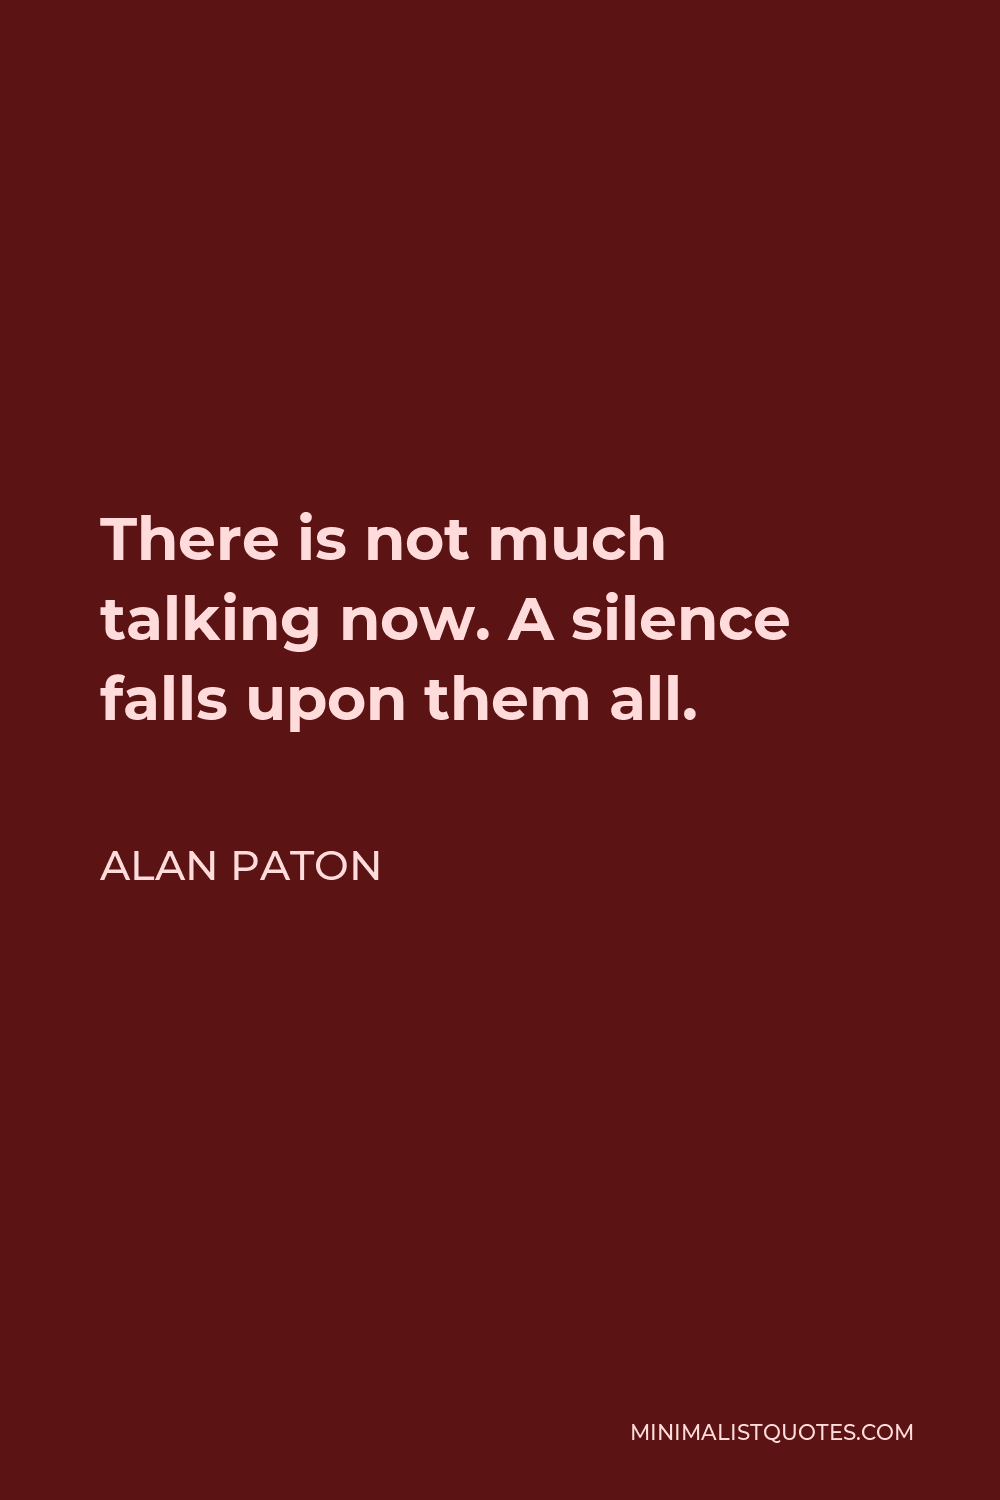 Alan Paton Quote - There is not much talking now. A silence falls upon them all.